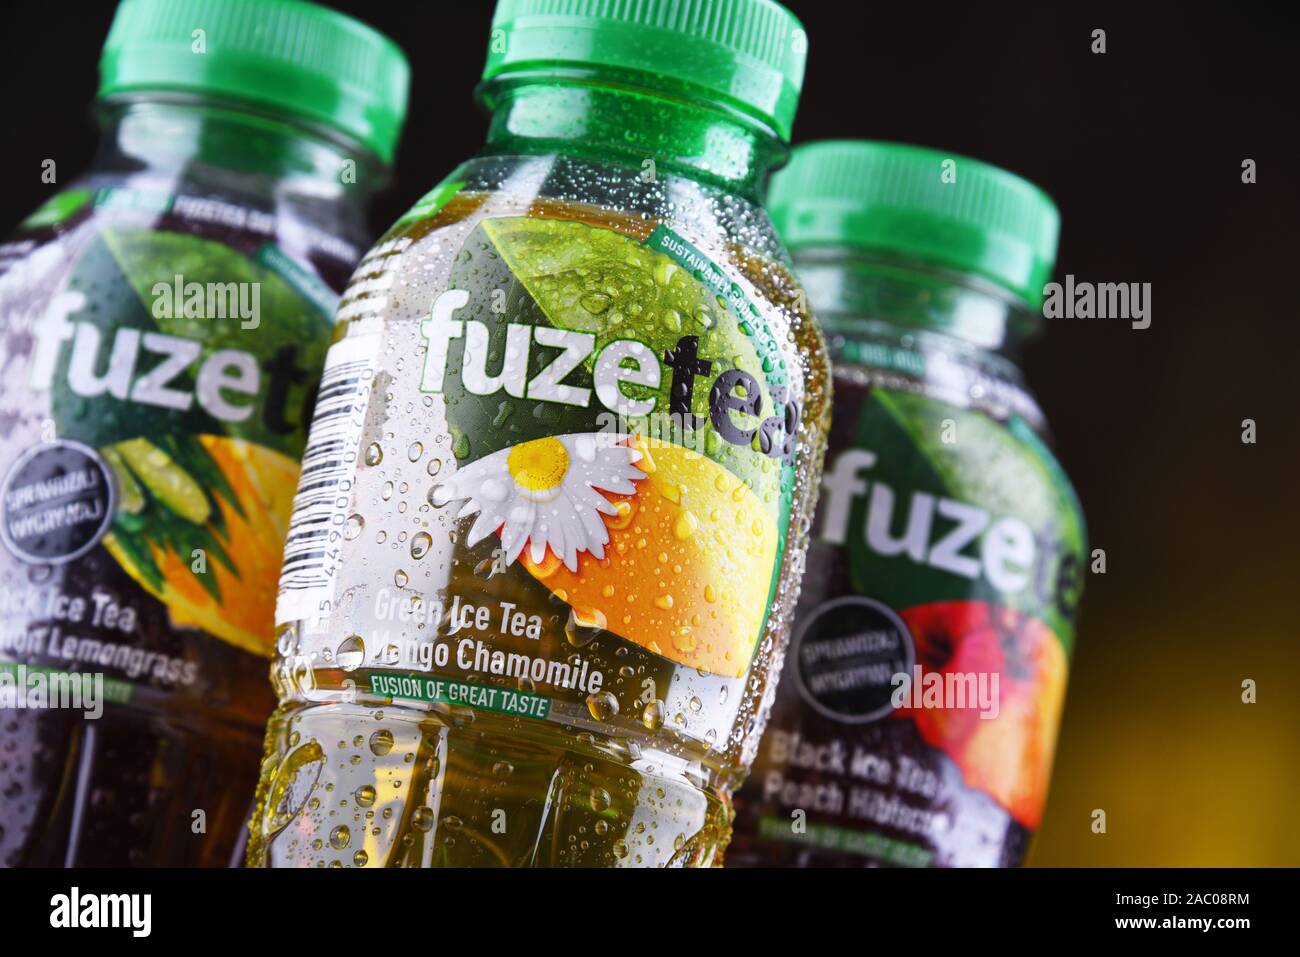 POZNAN, POL - OCT 23, 2019: Plastic bottles of Fuze Ice Tea, a soft drink brand sold by Fuze Beverage belonging to The Coca-Cola Company Stock Photo